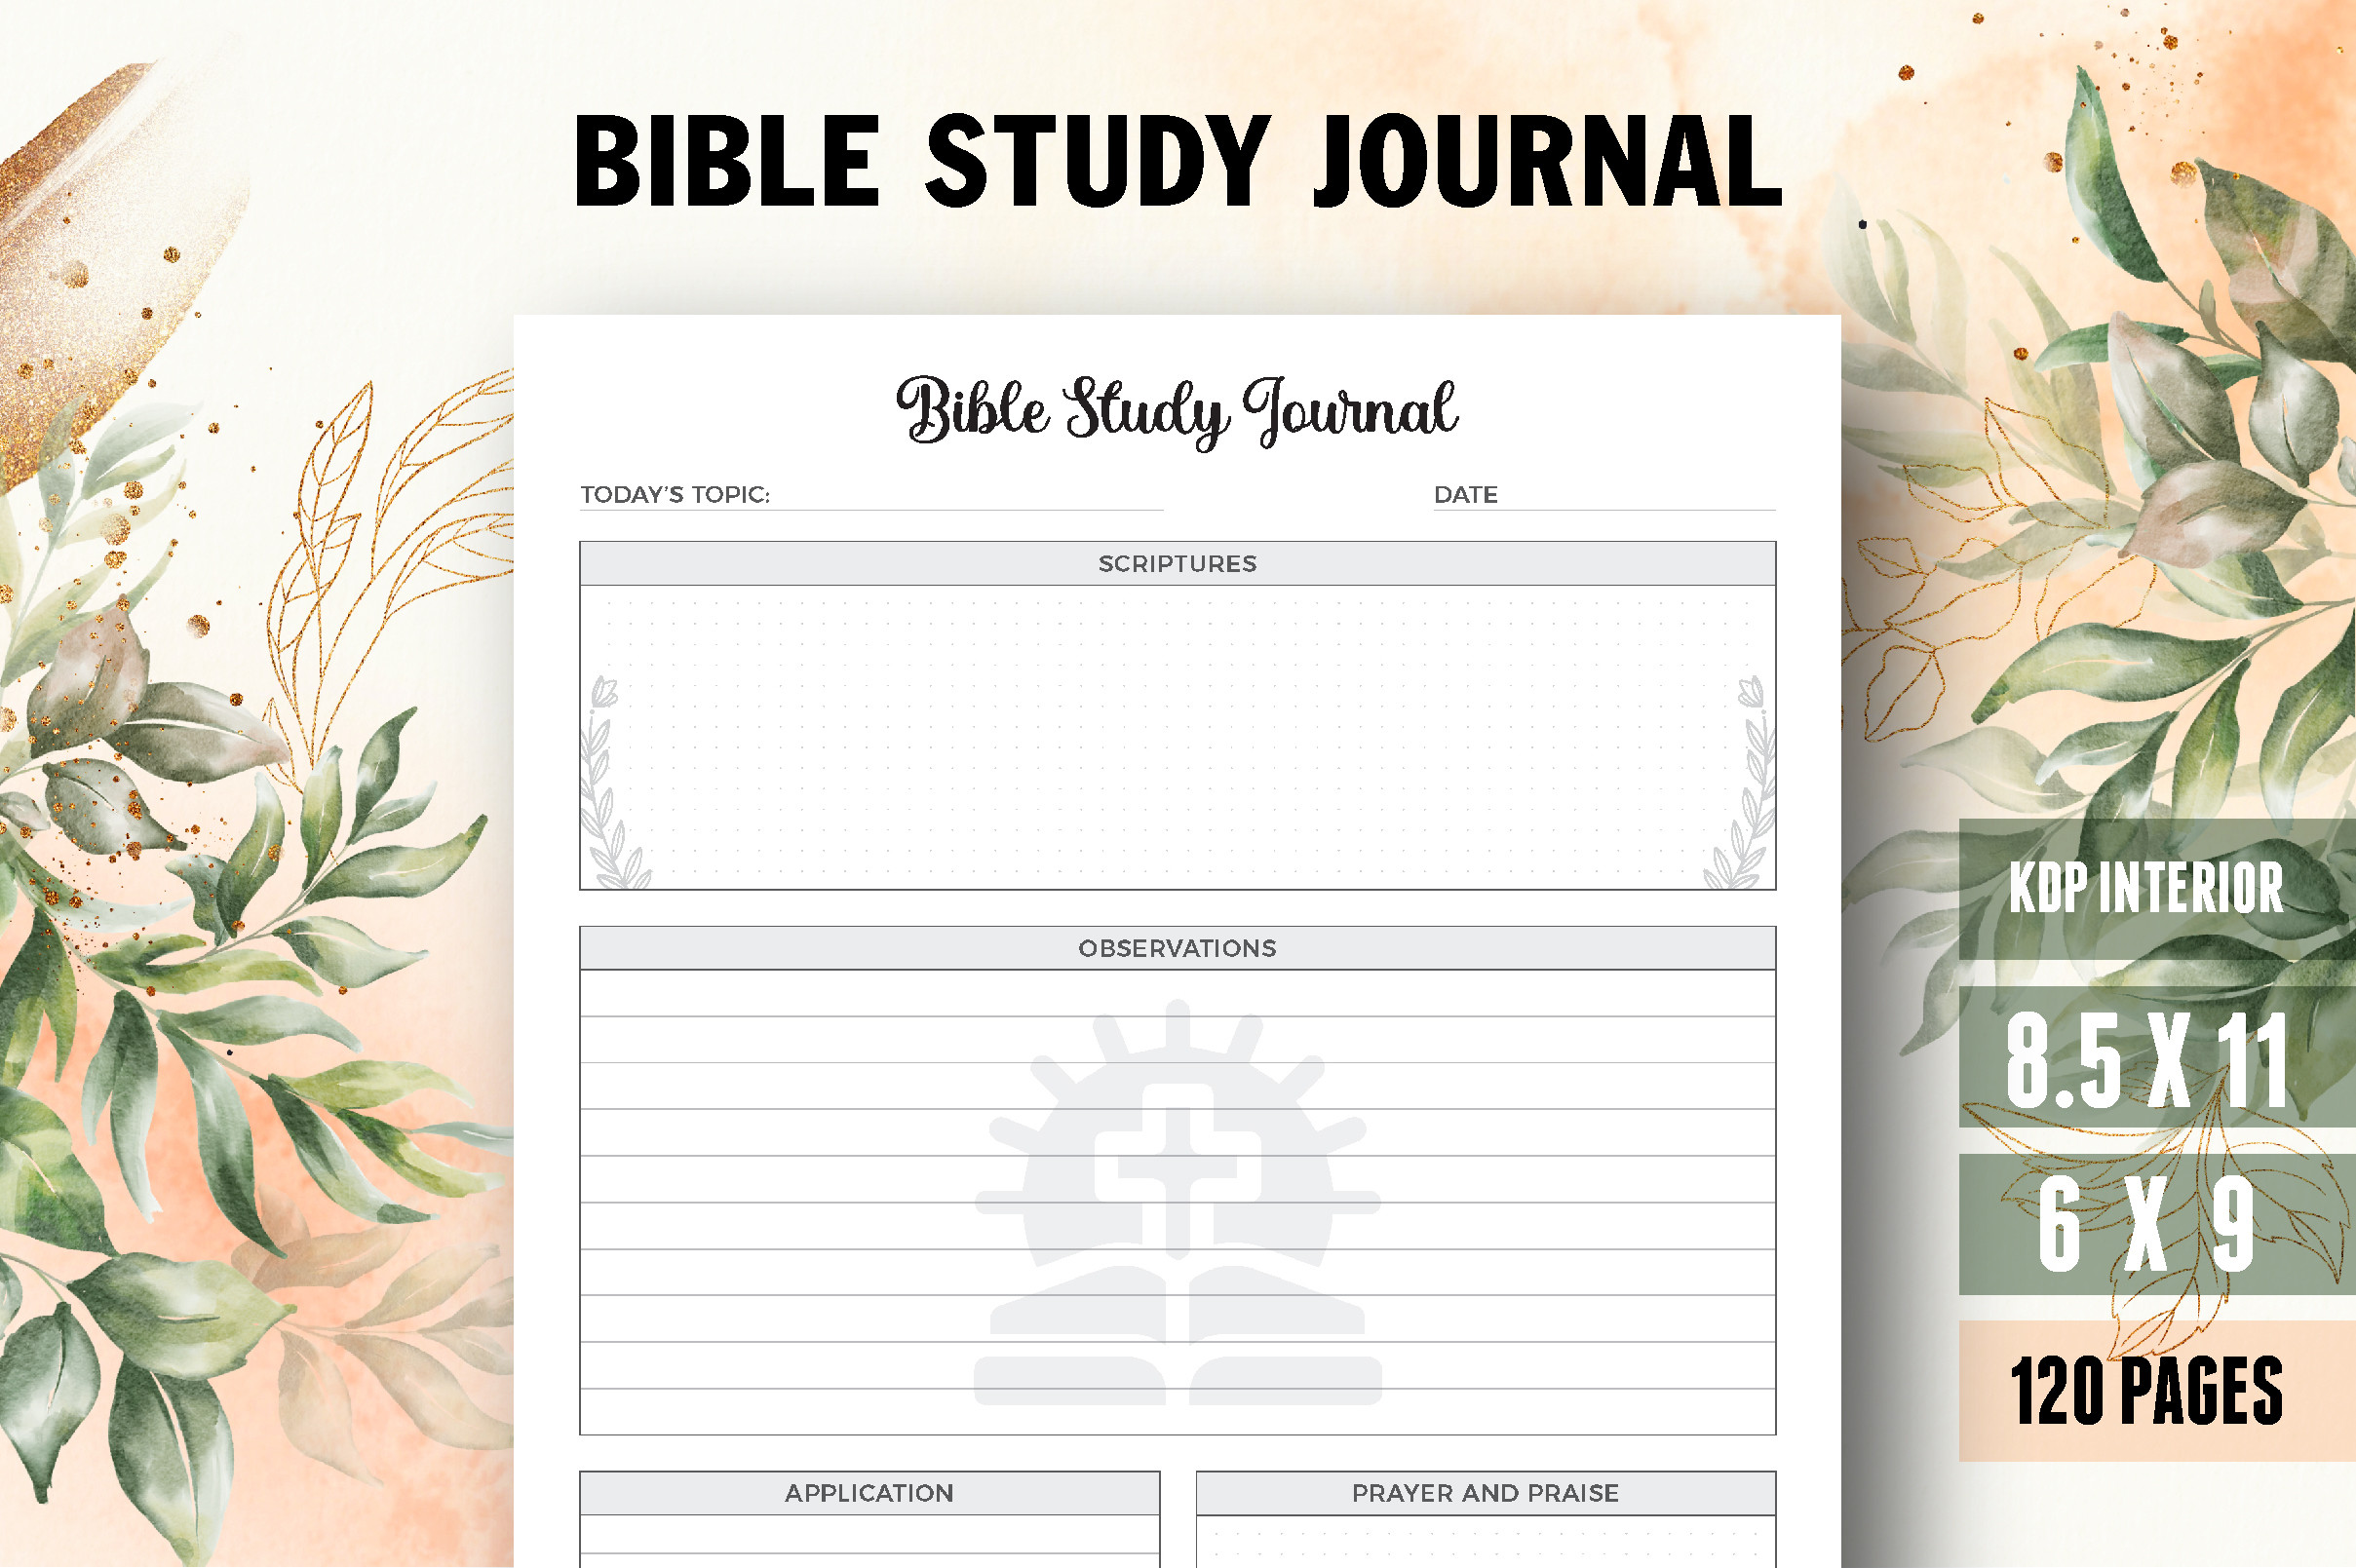 Bible Study Journal, Bible Planner Graphic by Vector Cafe · Creative